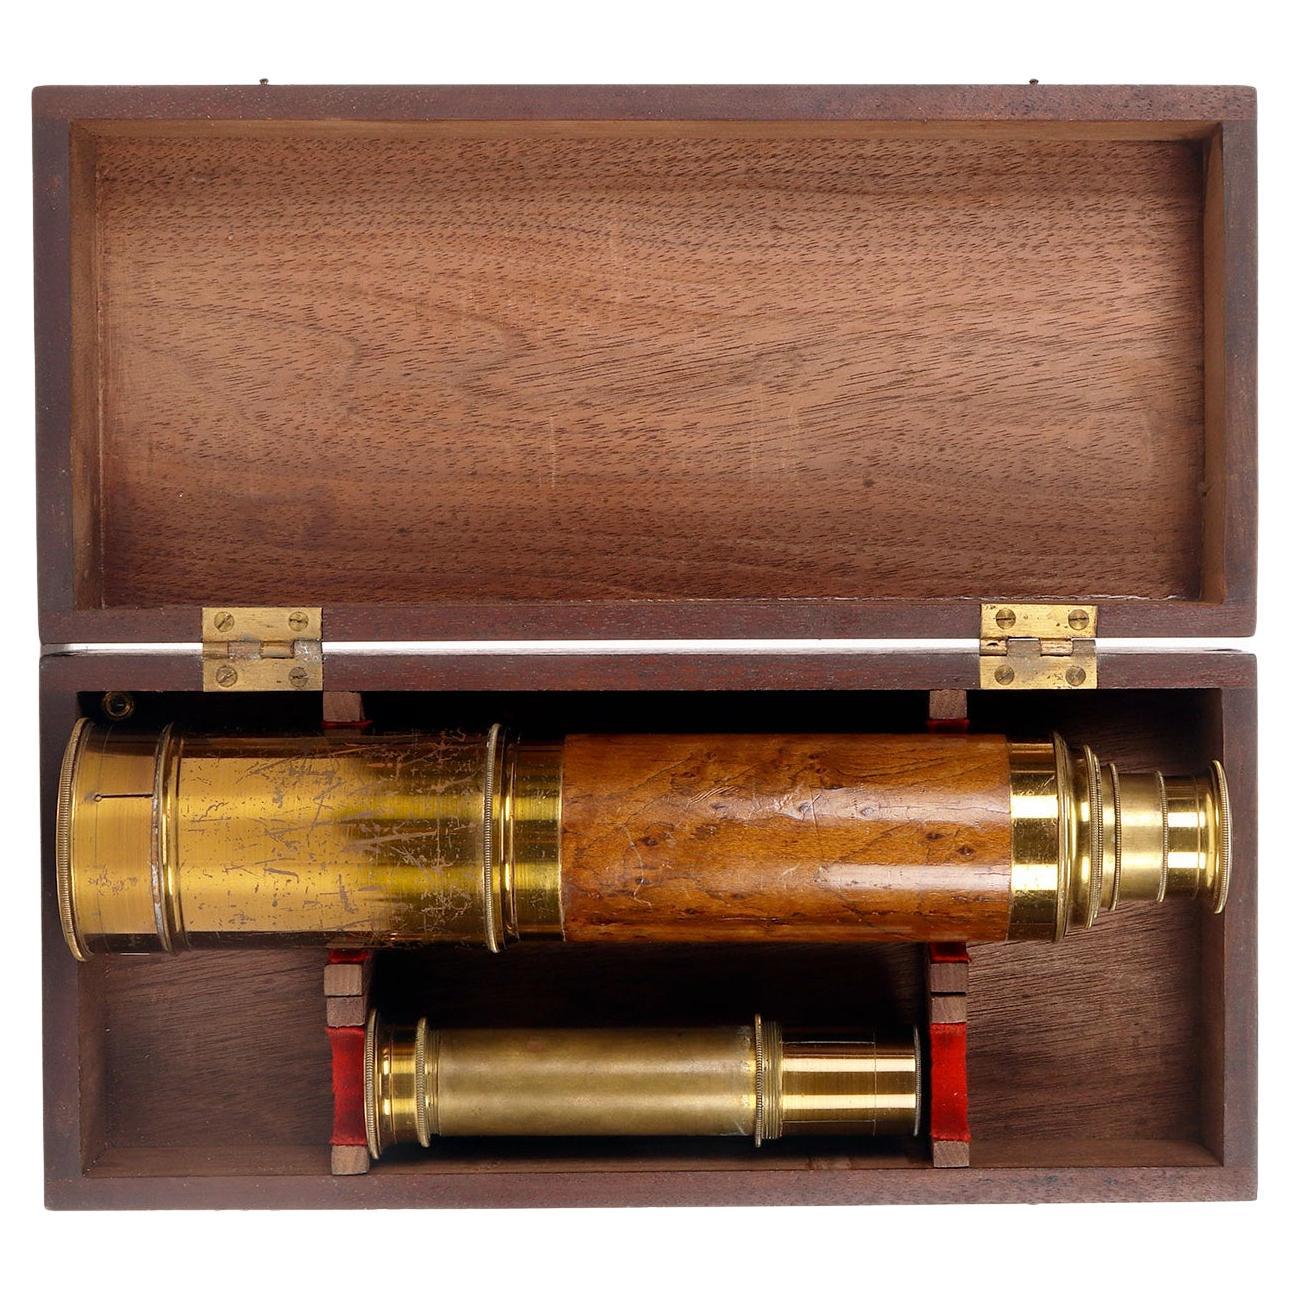 A telescope, four extractions, Germany 1880. For Sale at 1stDibs